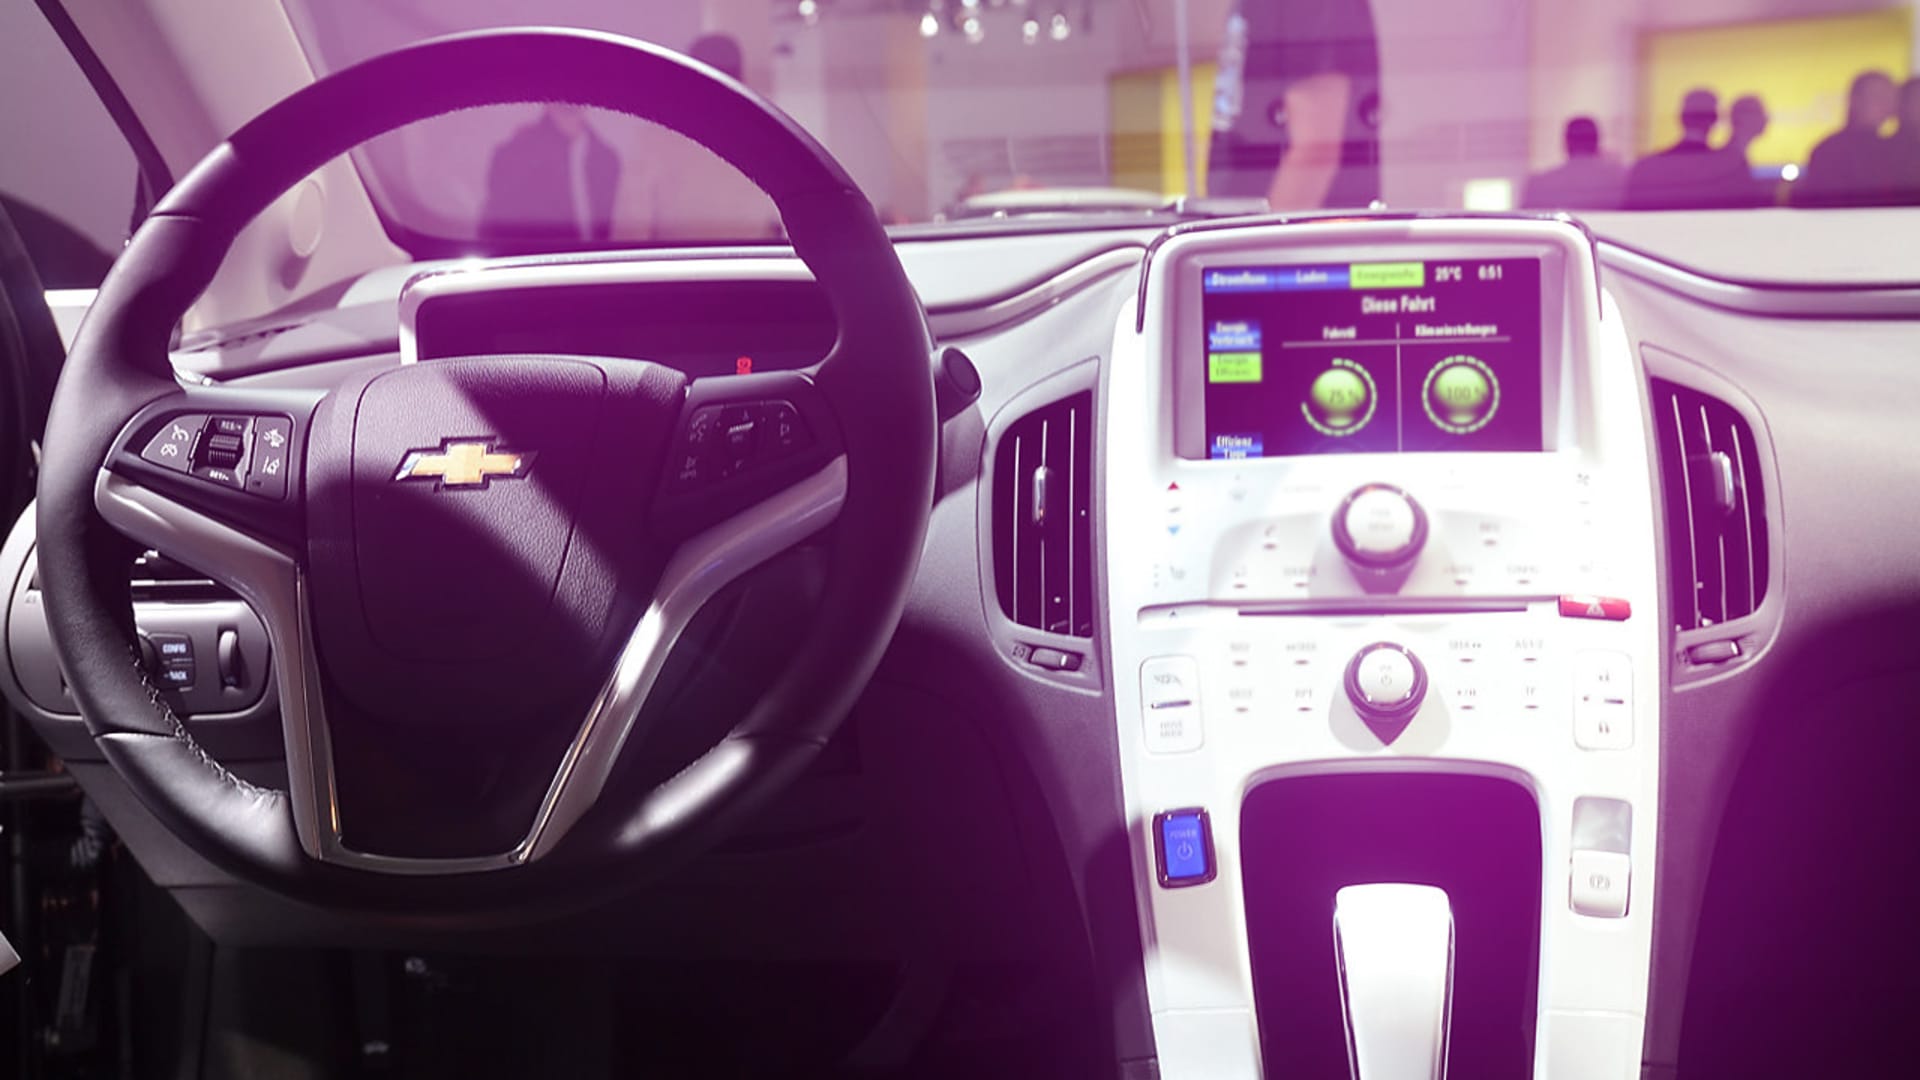 GM Partners With Lyft To Build A Network Of Self-Driving Cars